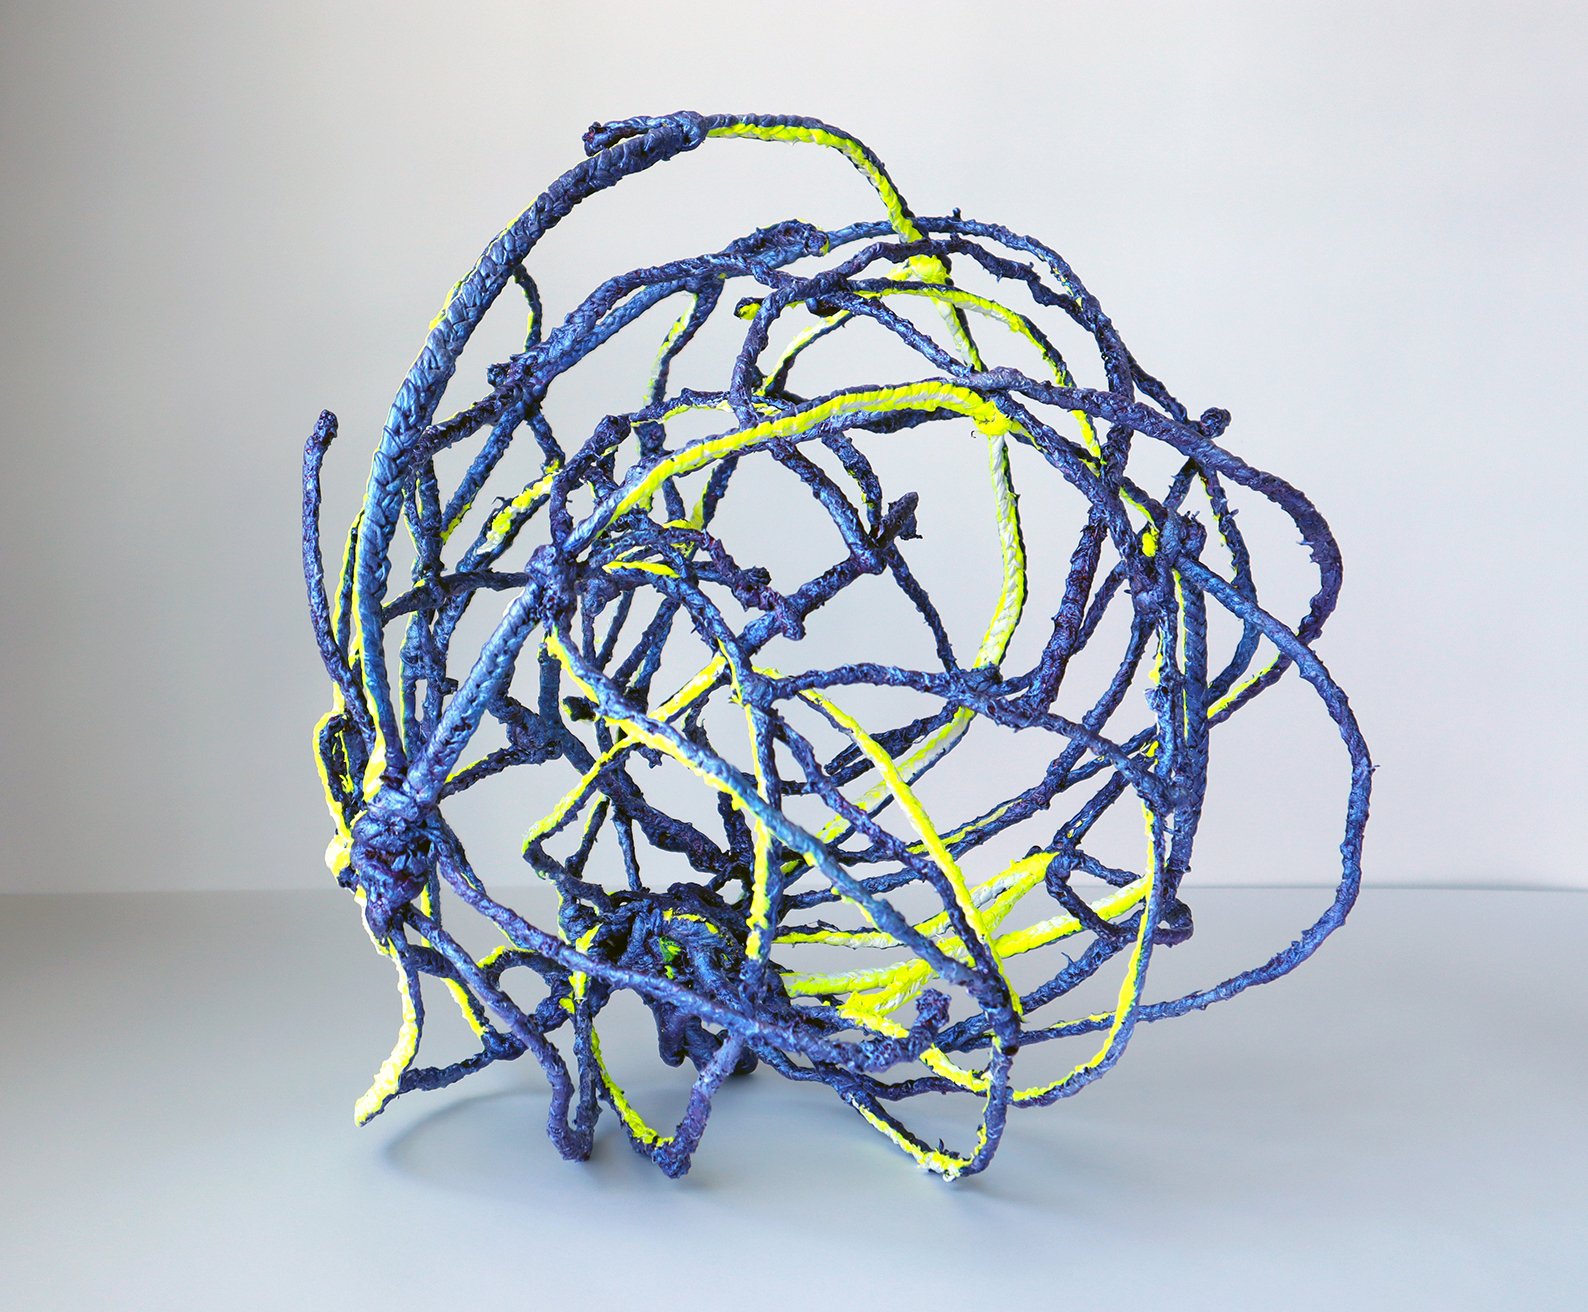  Still Going (Texas). 2012-2022.   Wire, fabric, acrylic paint  17 x 16 x 16.5 inches 